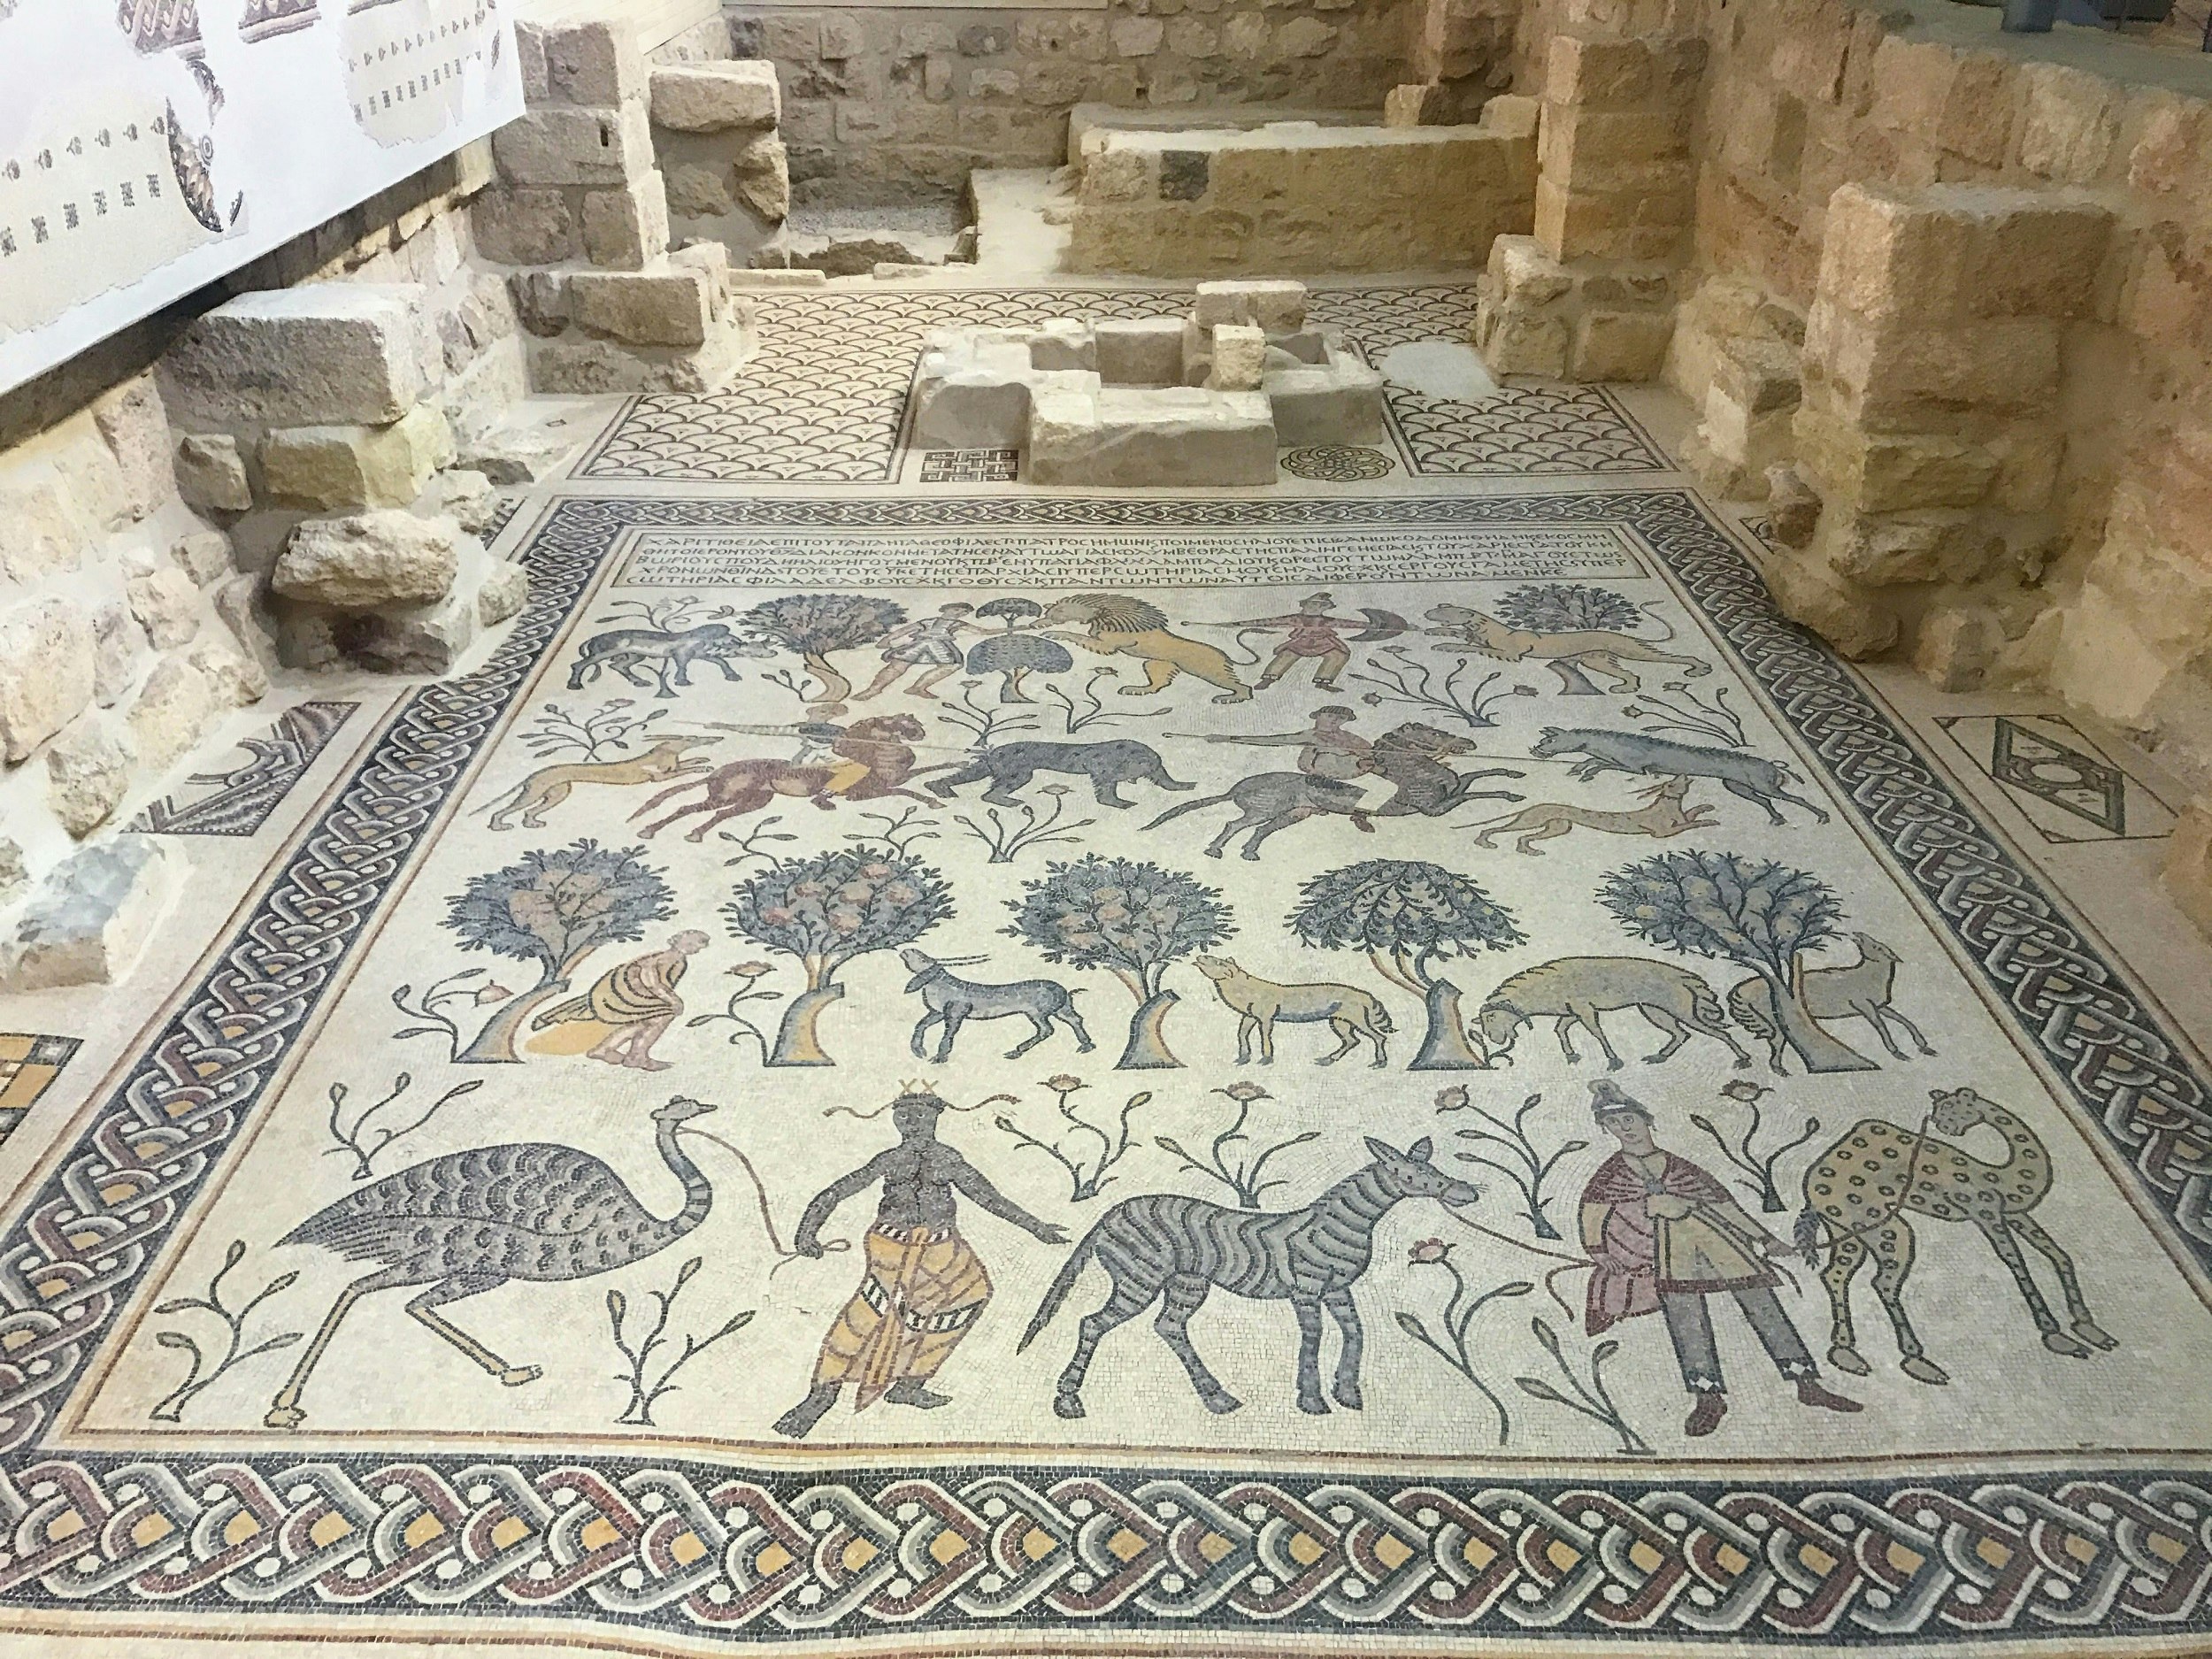 A lovely mosaic with braided border that features people, trees and various animals, such as zebras, ostriches, camels, donkeys and lions.